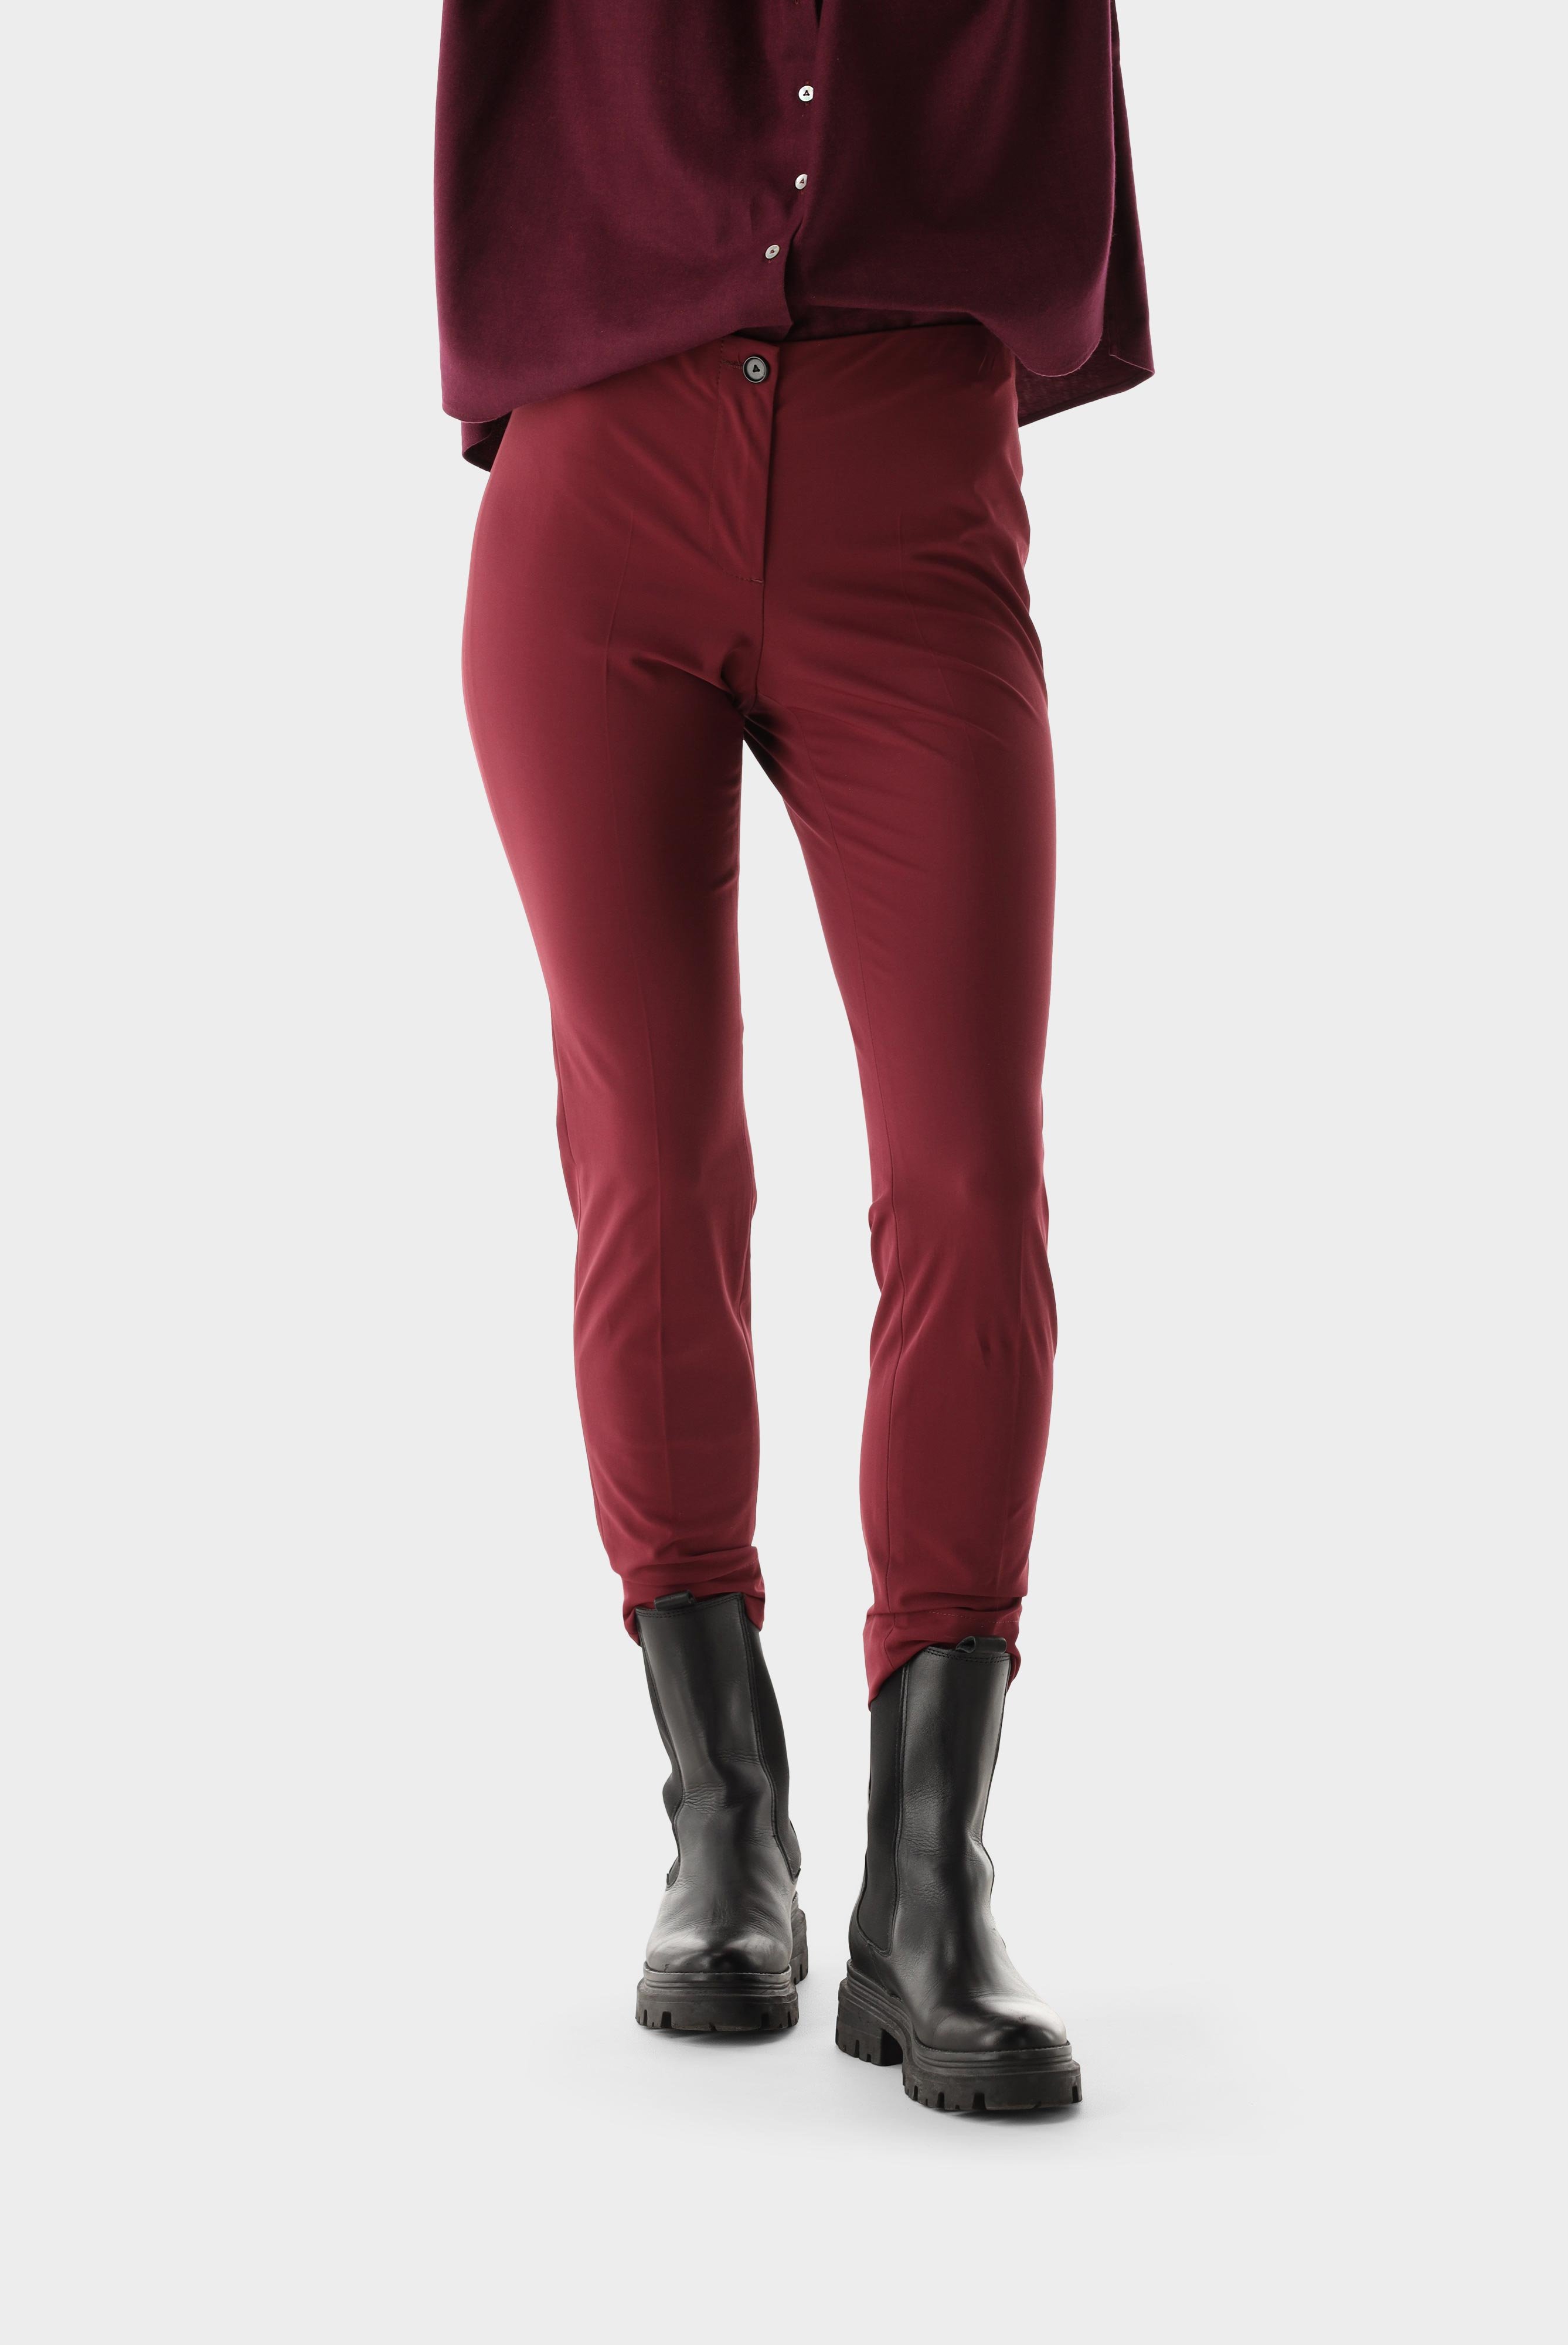 Jeans & Trousers+Trousers with Straiht Leg Slim Fit+04.635K..J00144.580.36